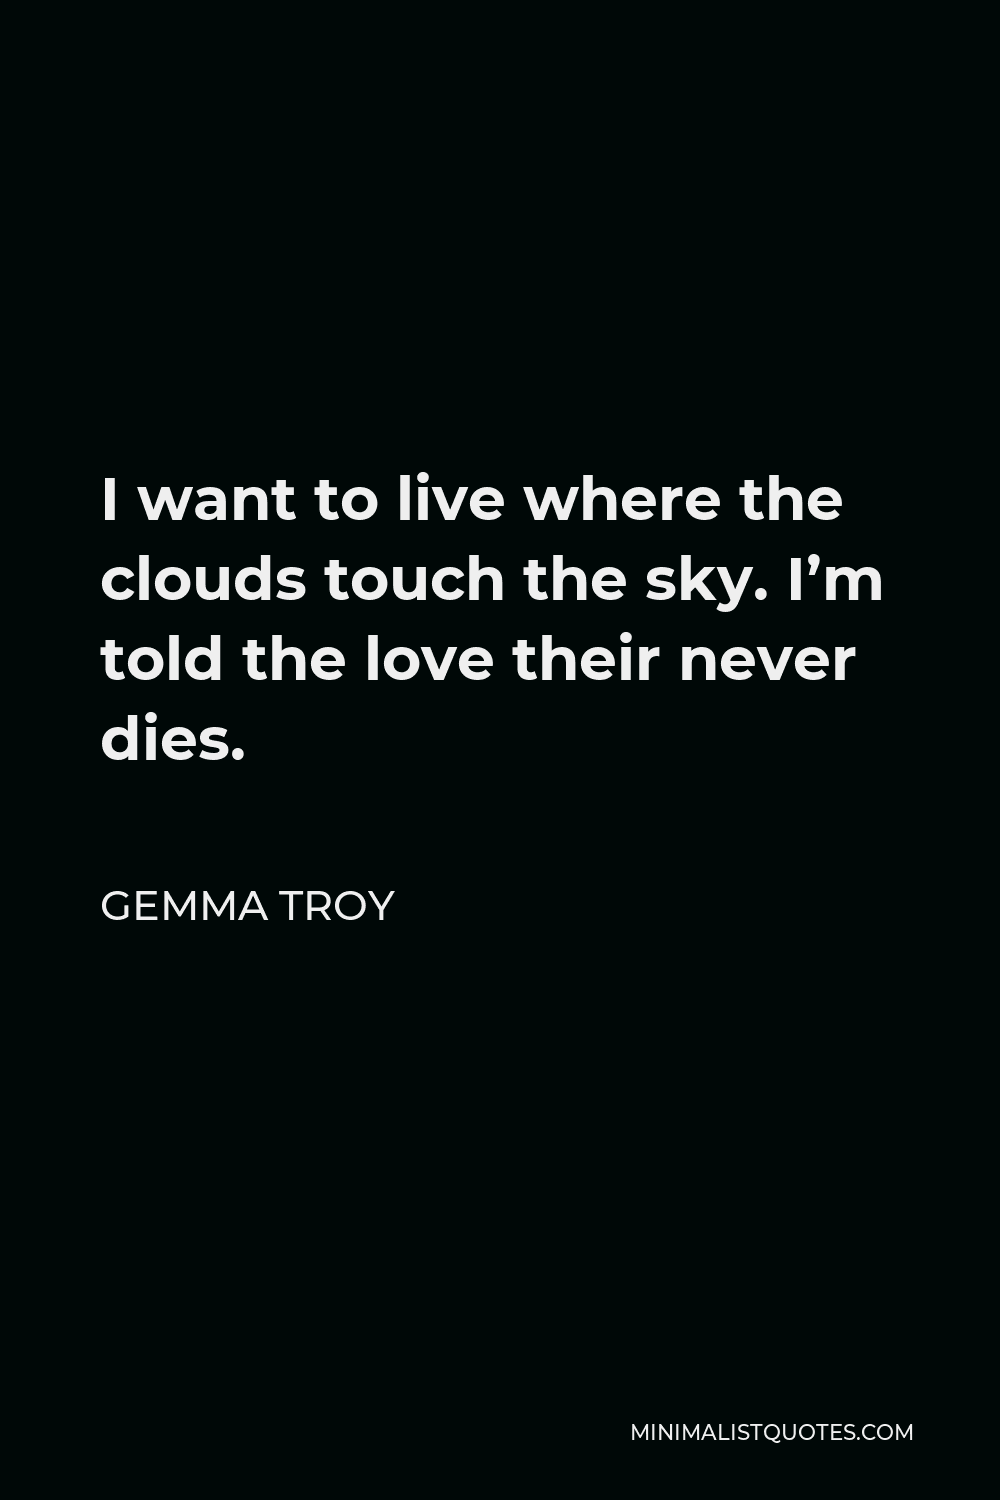 Gemma Troy Quote - I want to live where the clouds touch the sky. I’m told the love their never dies.